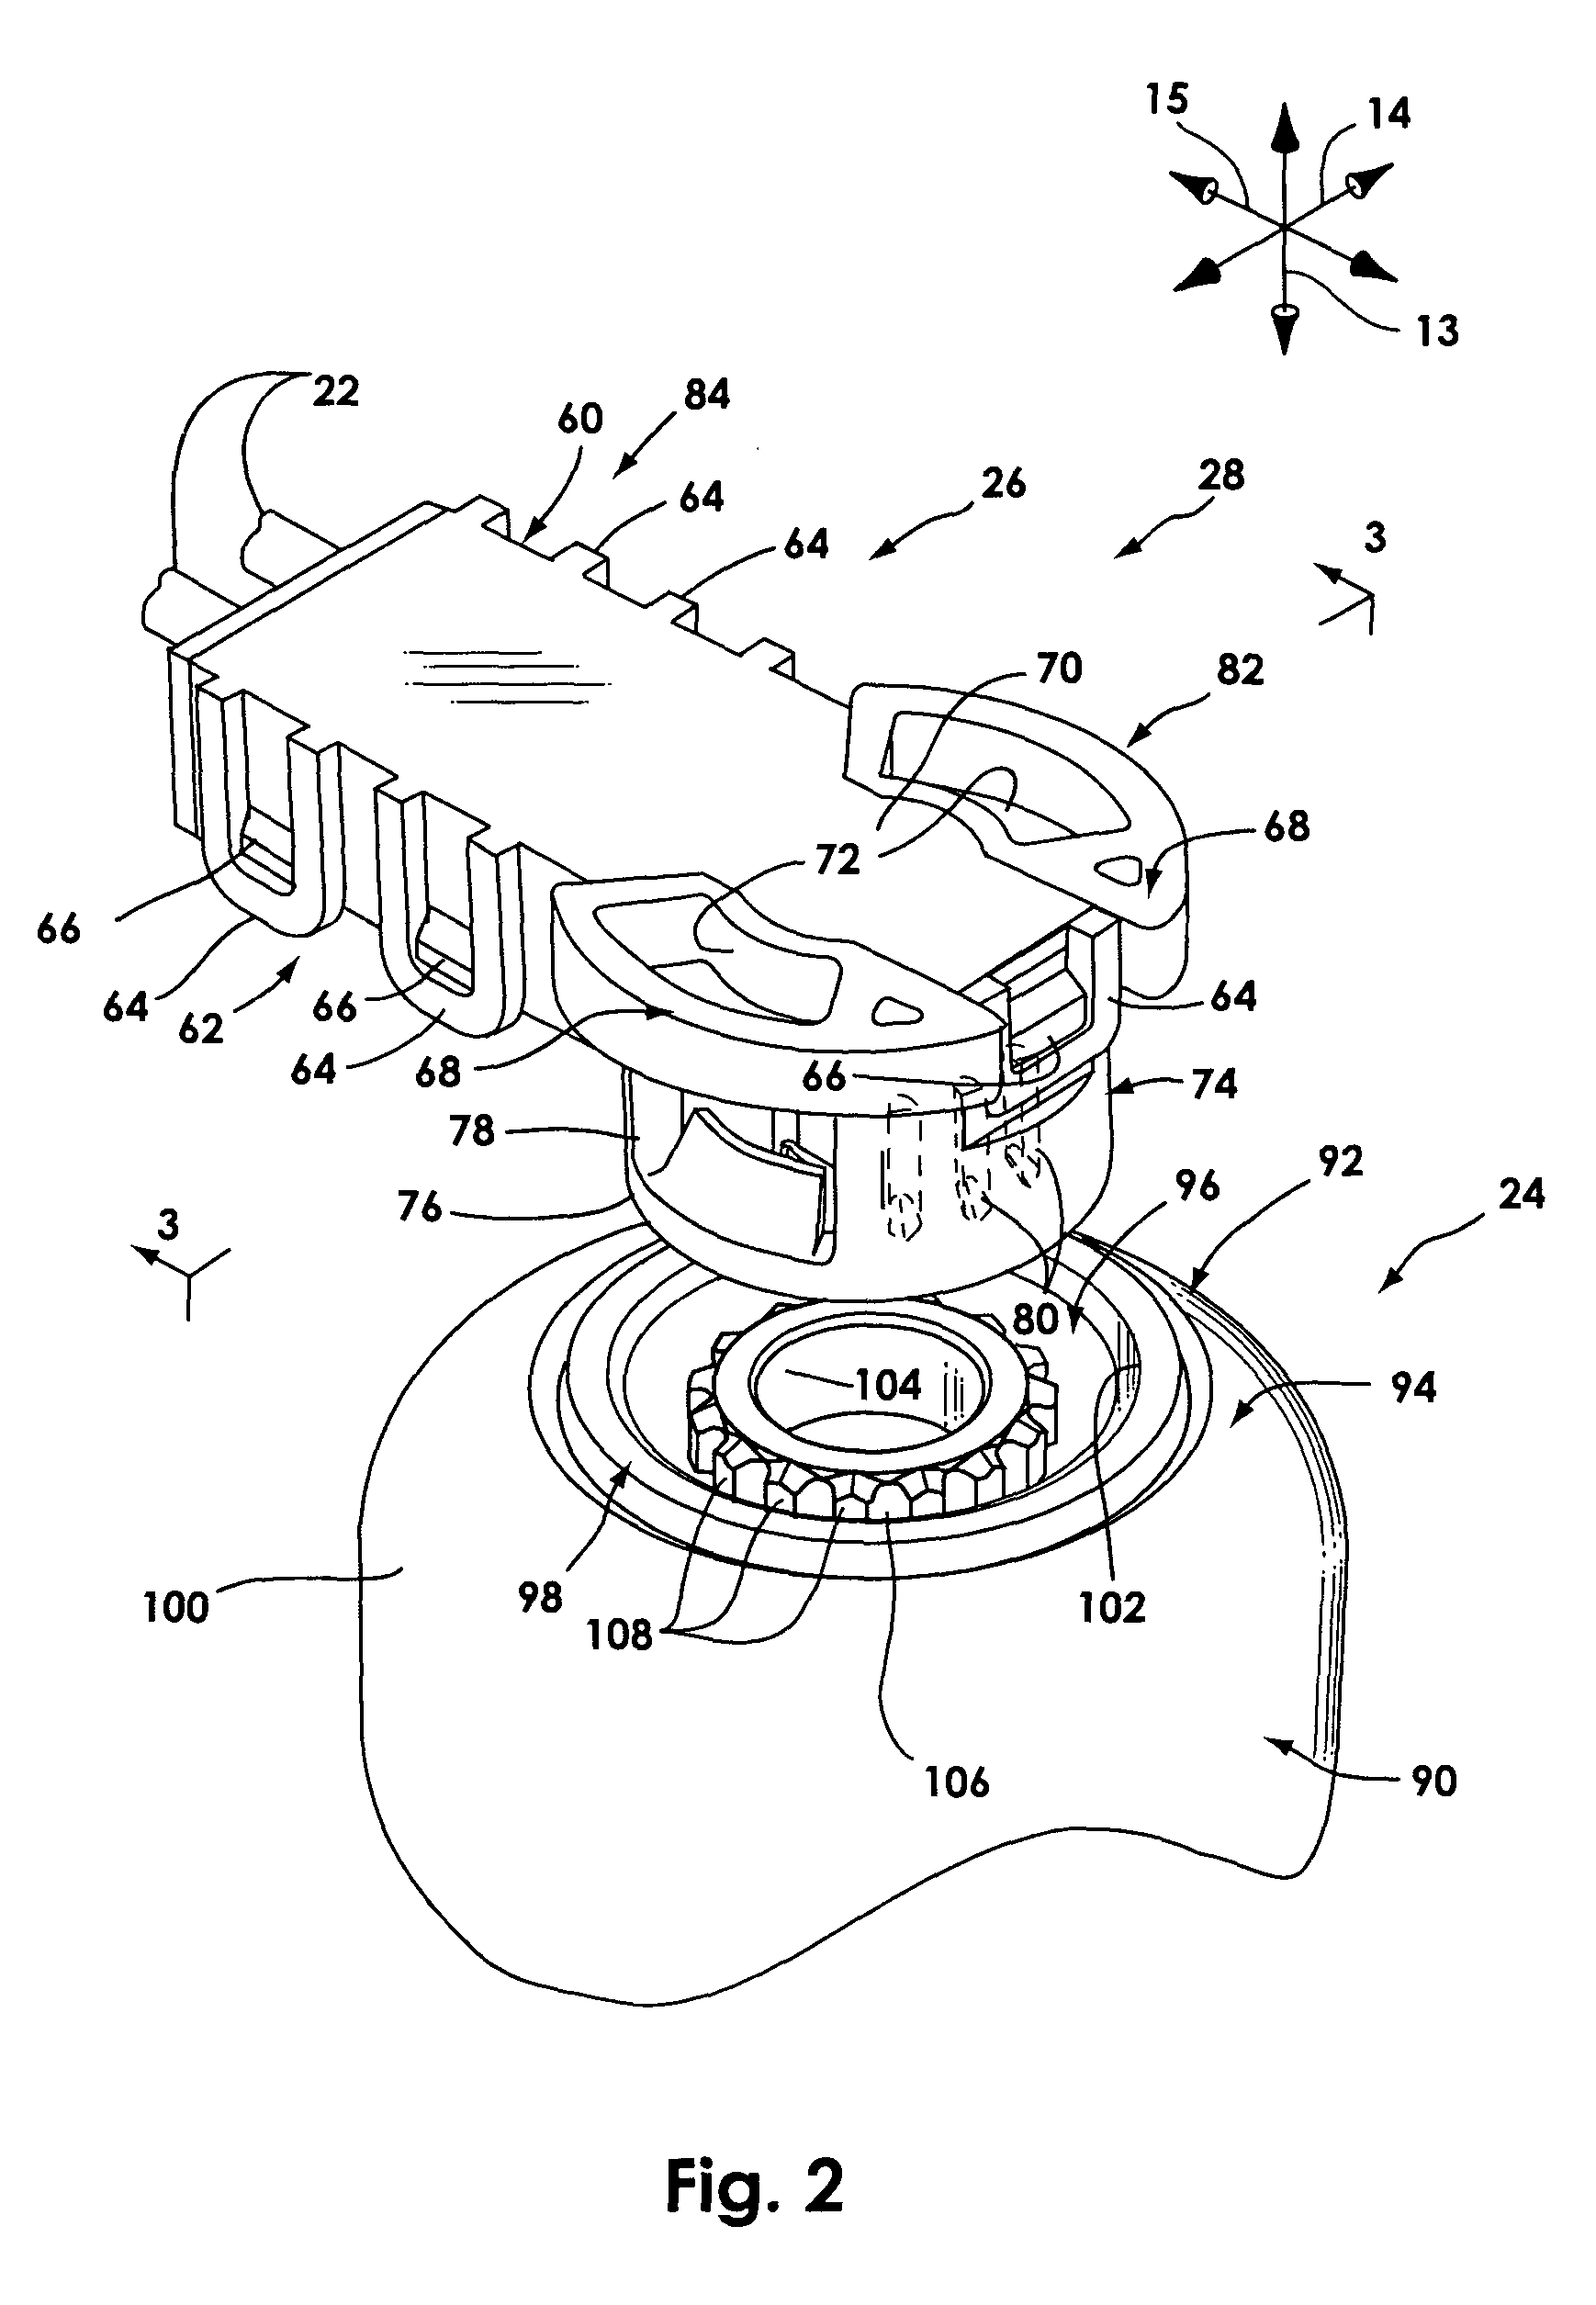 Airbag initiator cover attachment apparatus and method